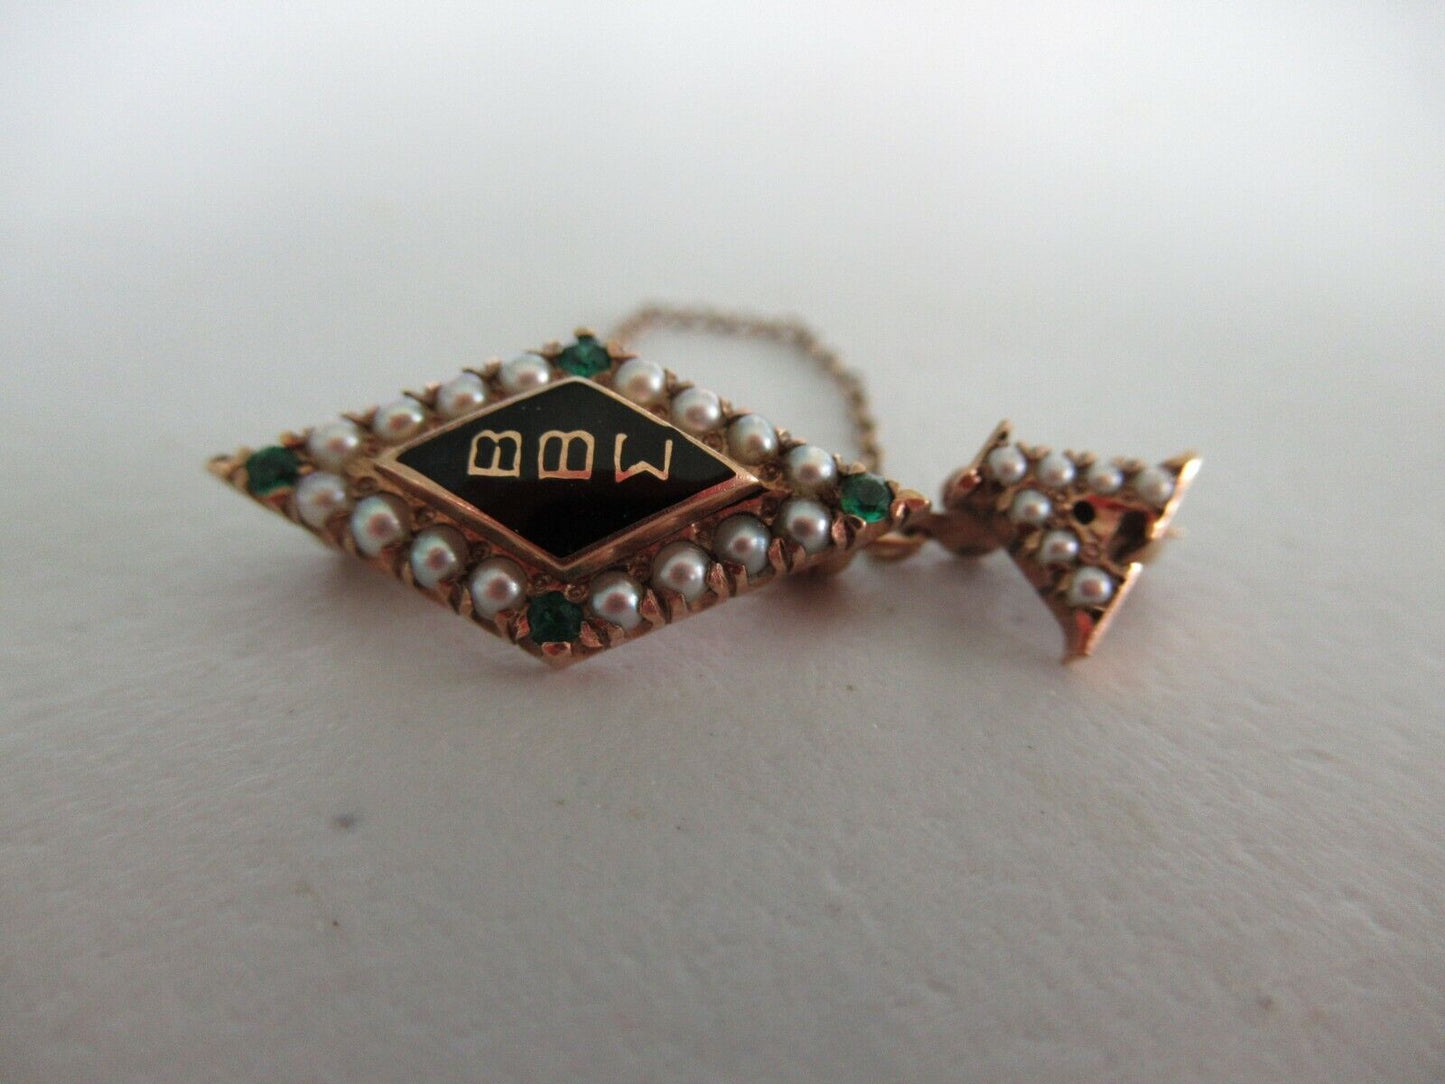 USA FRATERNITY PIN BETA BETA SIGMA. MADE IN GOLD. RUBIES. 1001